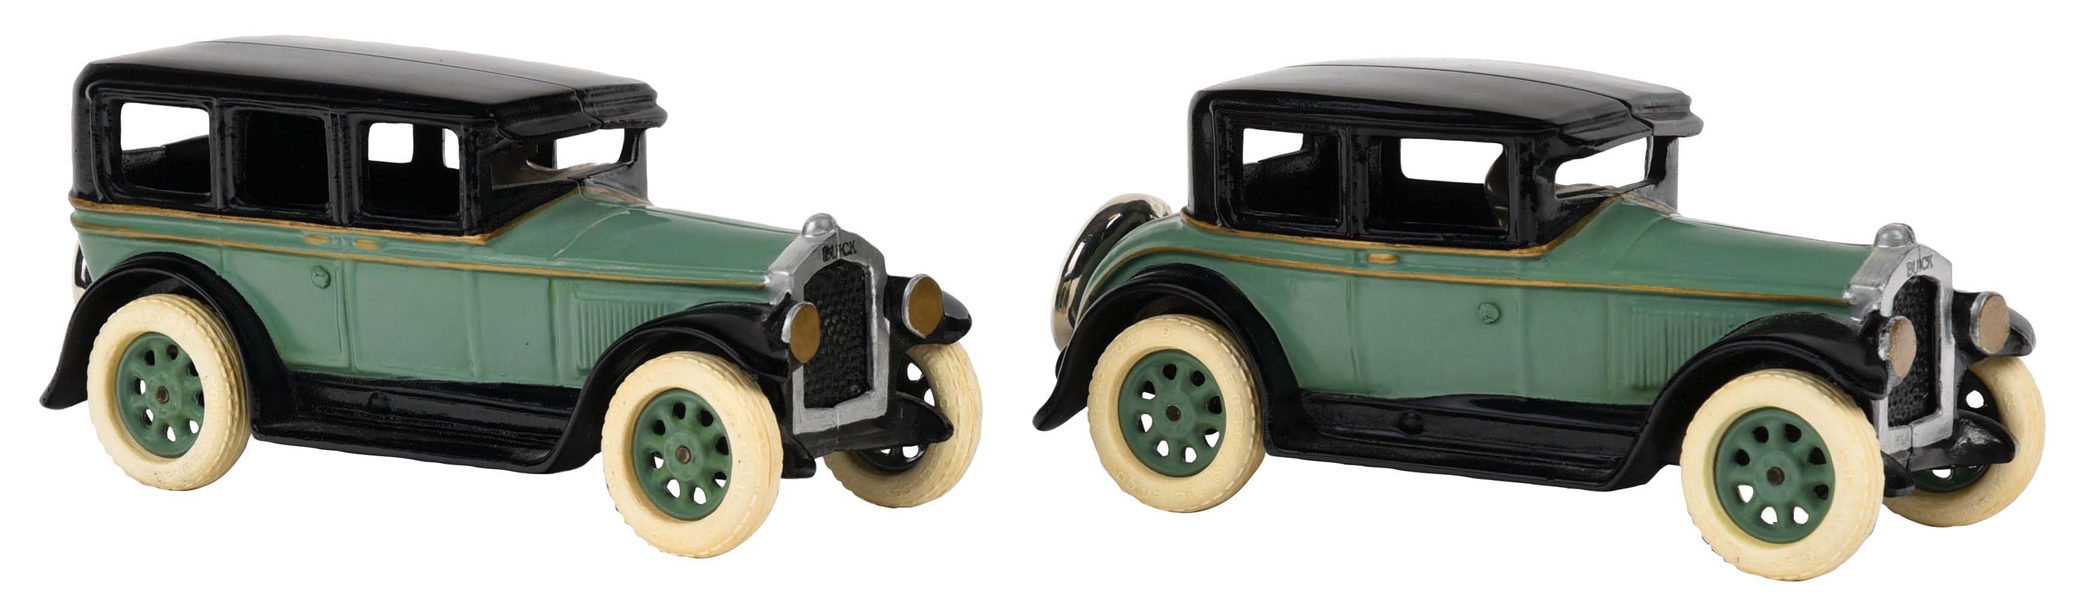 LOT OF 2: CONTEMPORARY CAST-IRON DON LEWIS BUICK AUTOMOBILES.